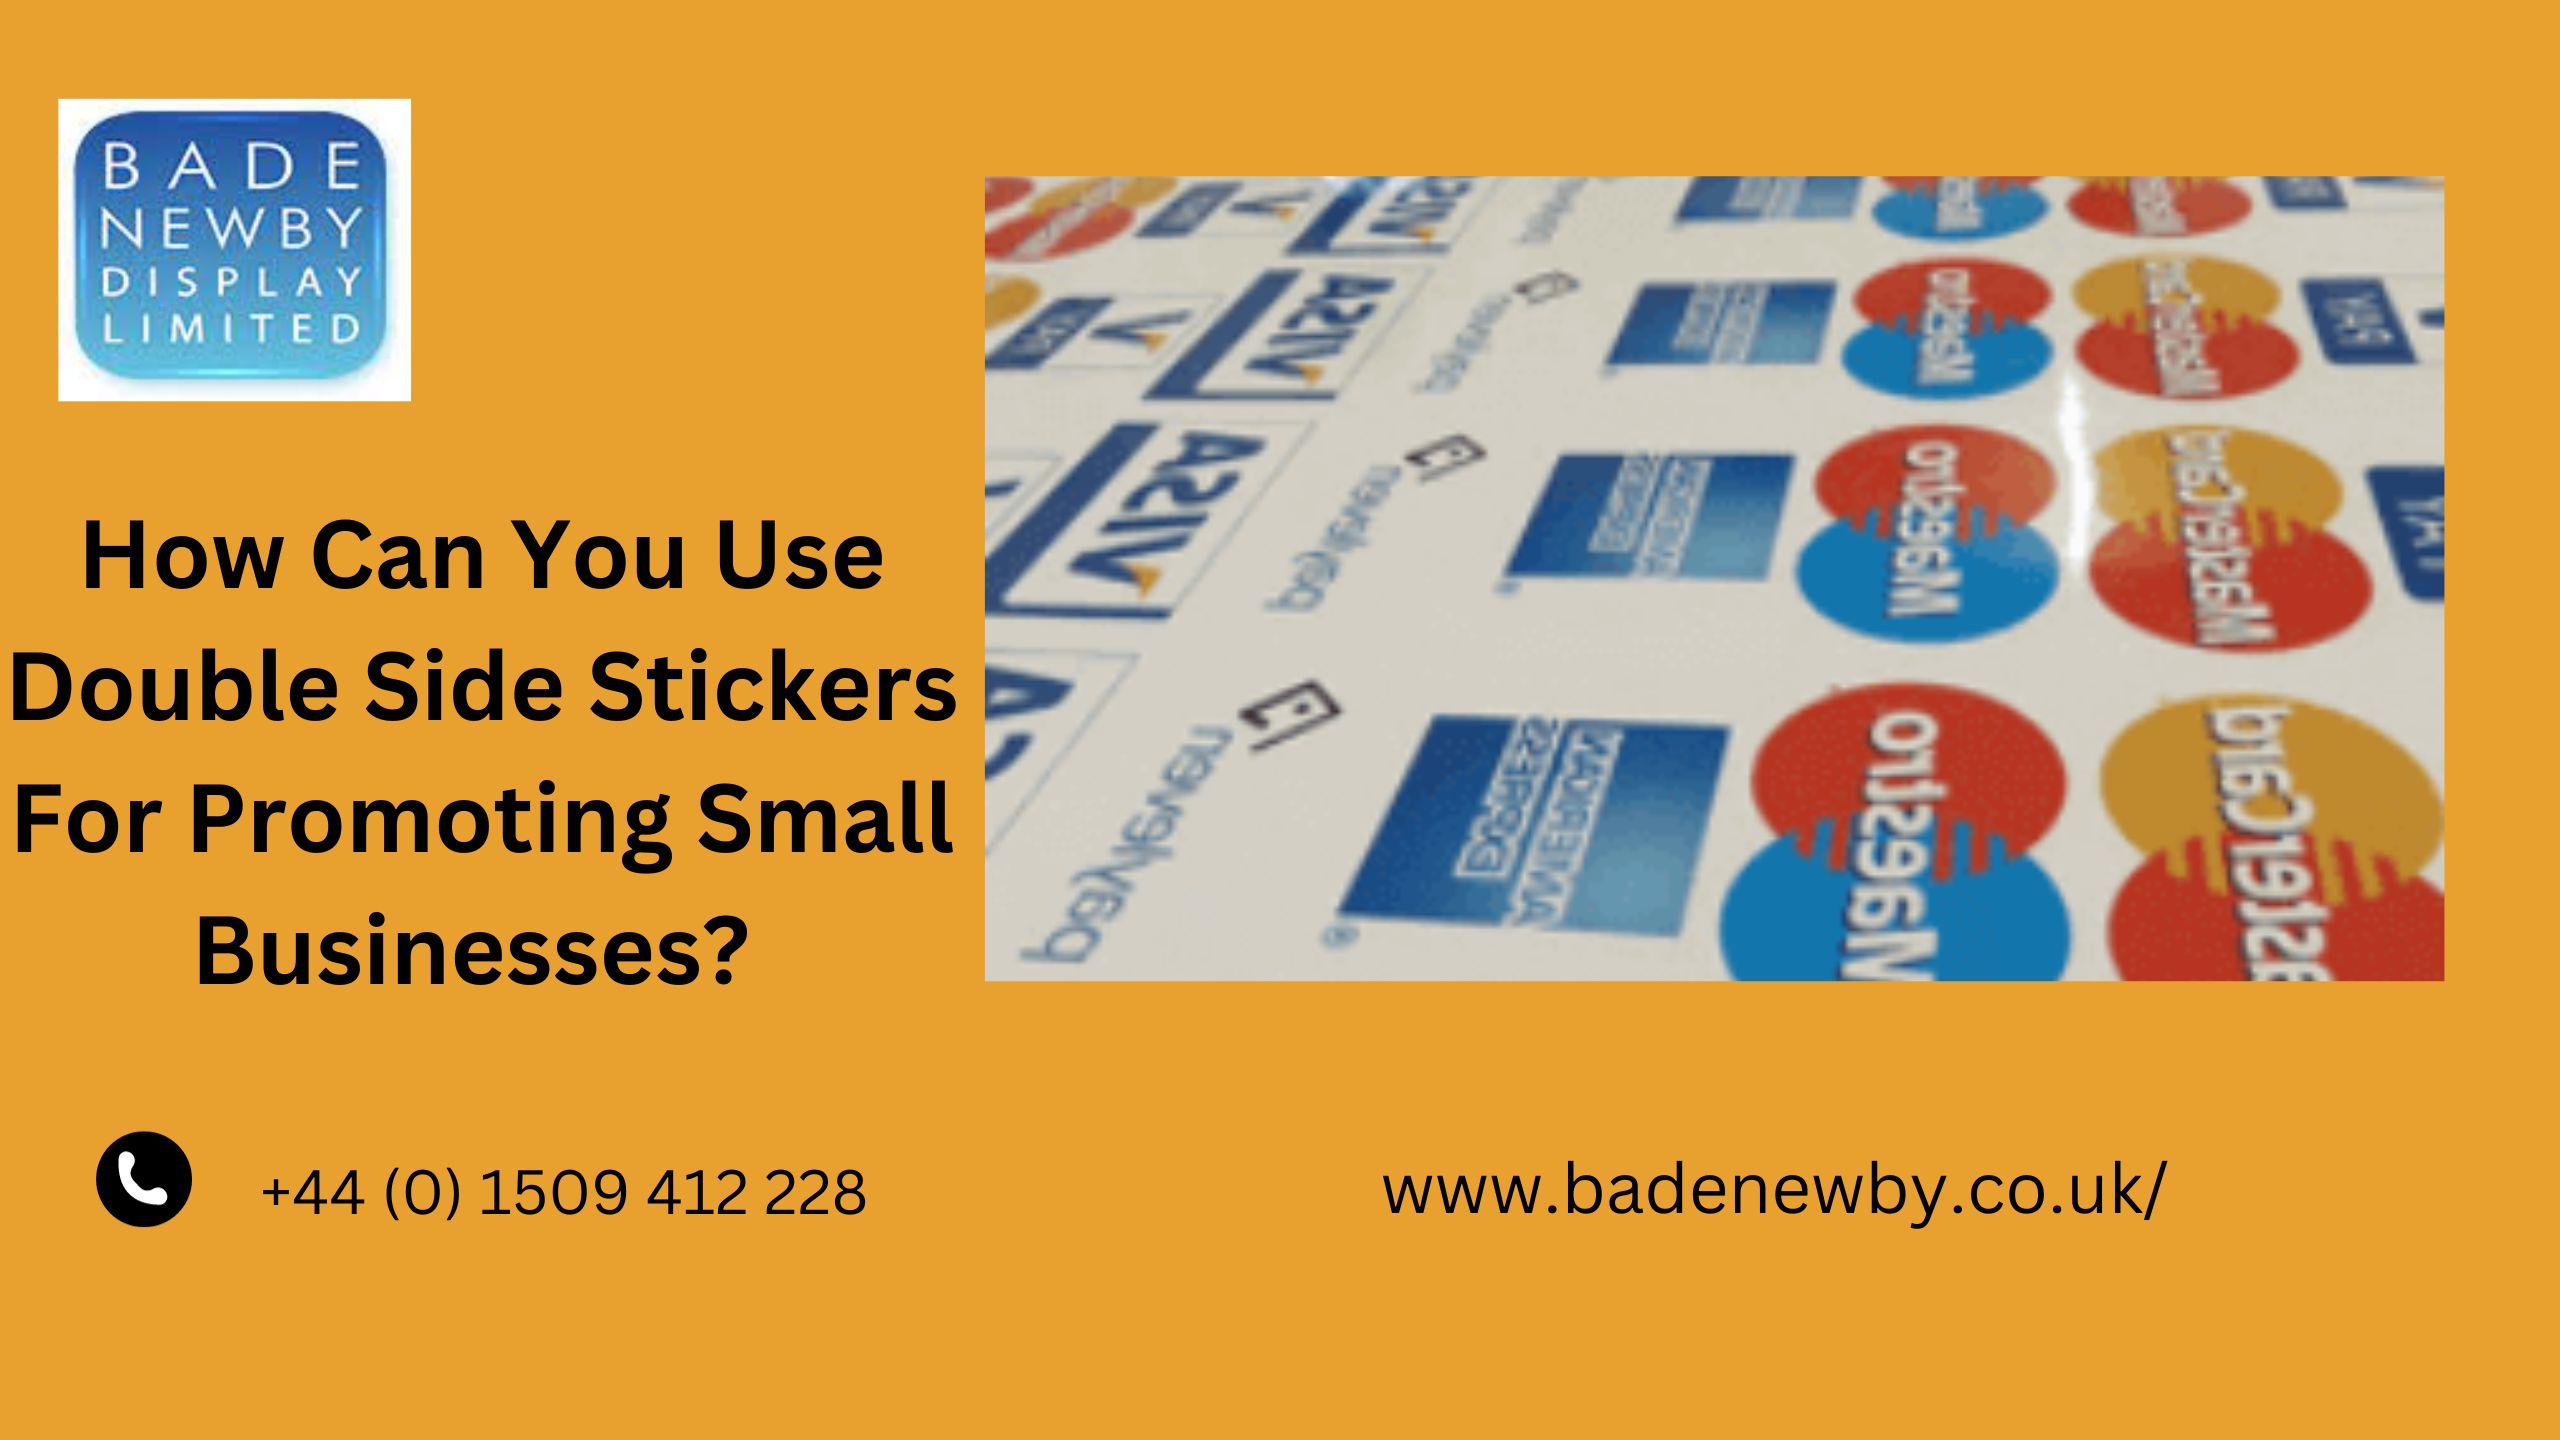 How Can You Use Double Side Stickers For Promoting Small Businesses?